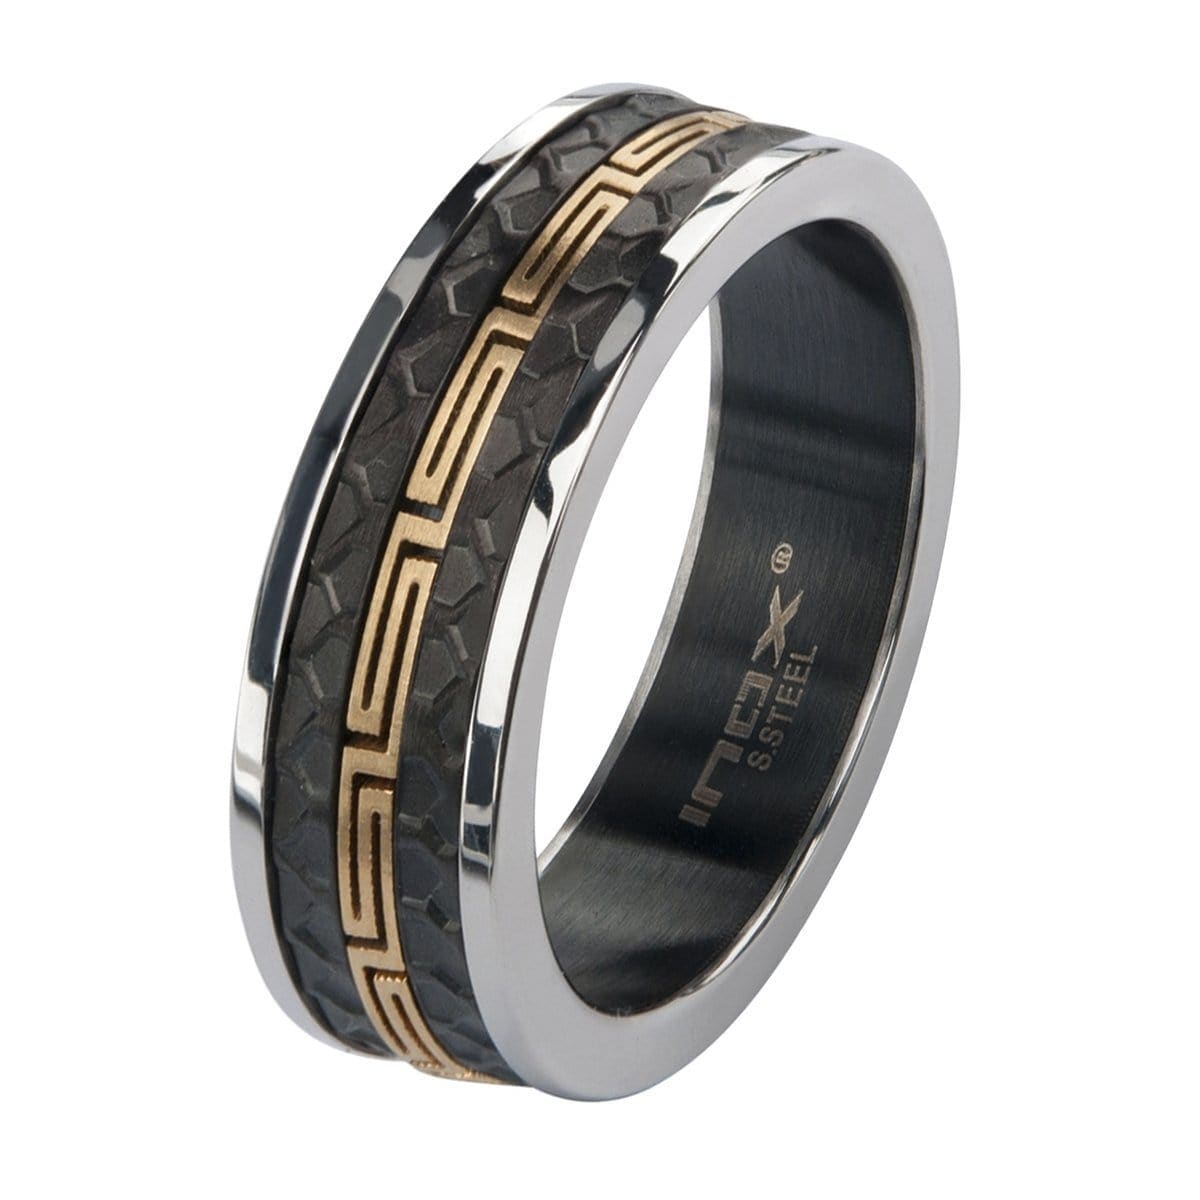 INOX JEWELRY Rings Golden Tone, Black and Silver Tone Stainless Steel Honeycomb and Greek Stripe Ring